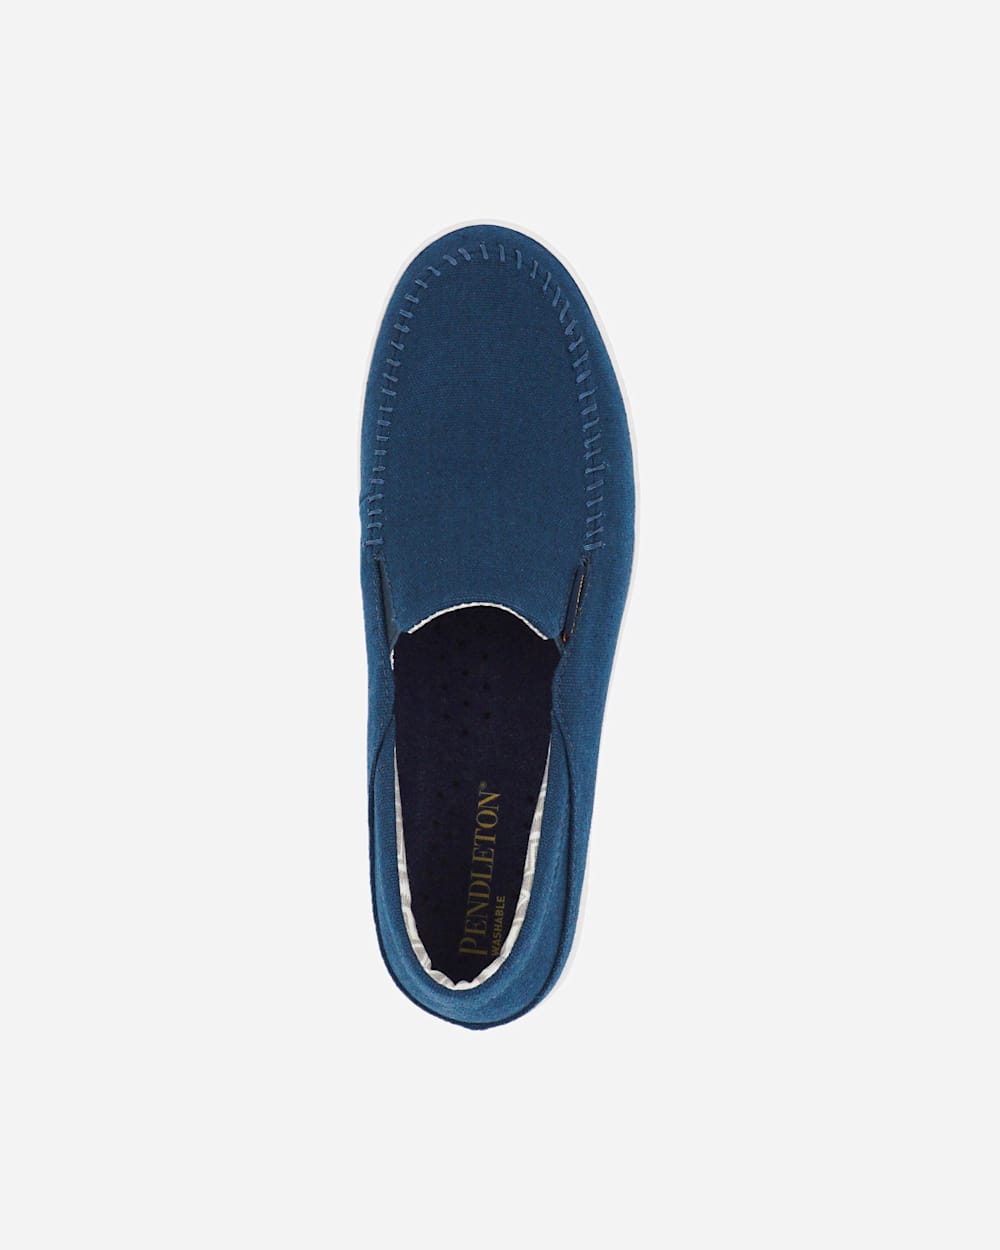 ALTERNATE VIEW OF MEN'S CANNON BEACH FLIP FLOPS IN BLUE image number 3